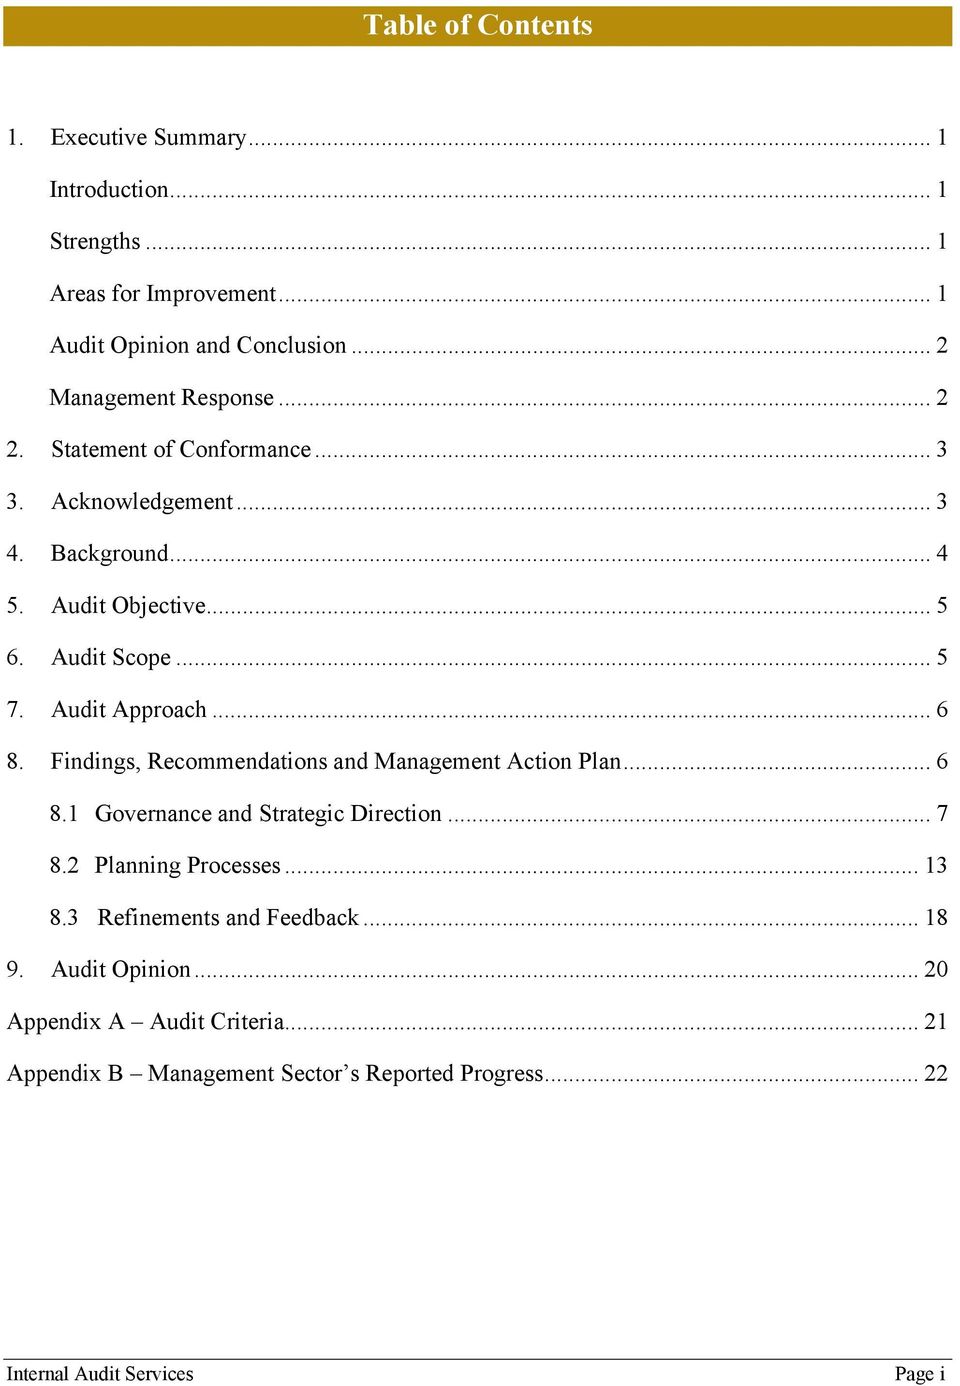 Audit Approach... 6 8. Findings, Recommendations and Management Action Plan... 6 8.1 Governance and Strategic Direction... 7 8.2 Planning Processes... 13 8.